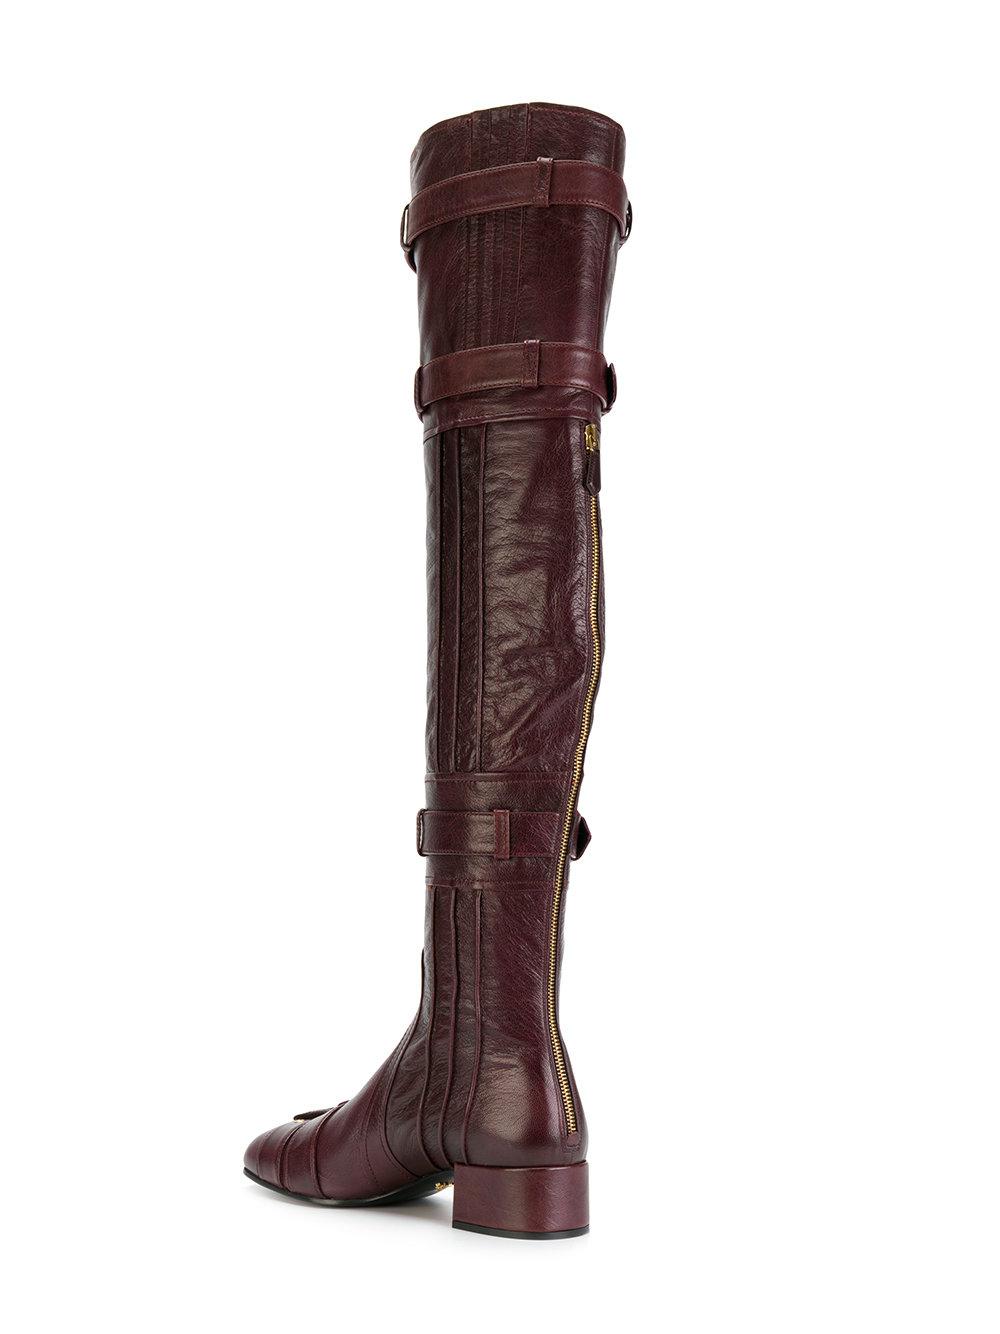 Prada Leather Thigh-high Buckle Boots in Red - Lyst